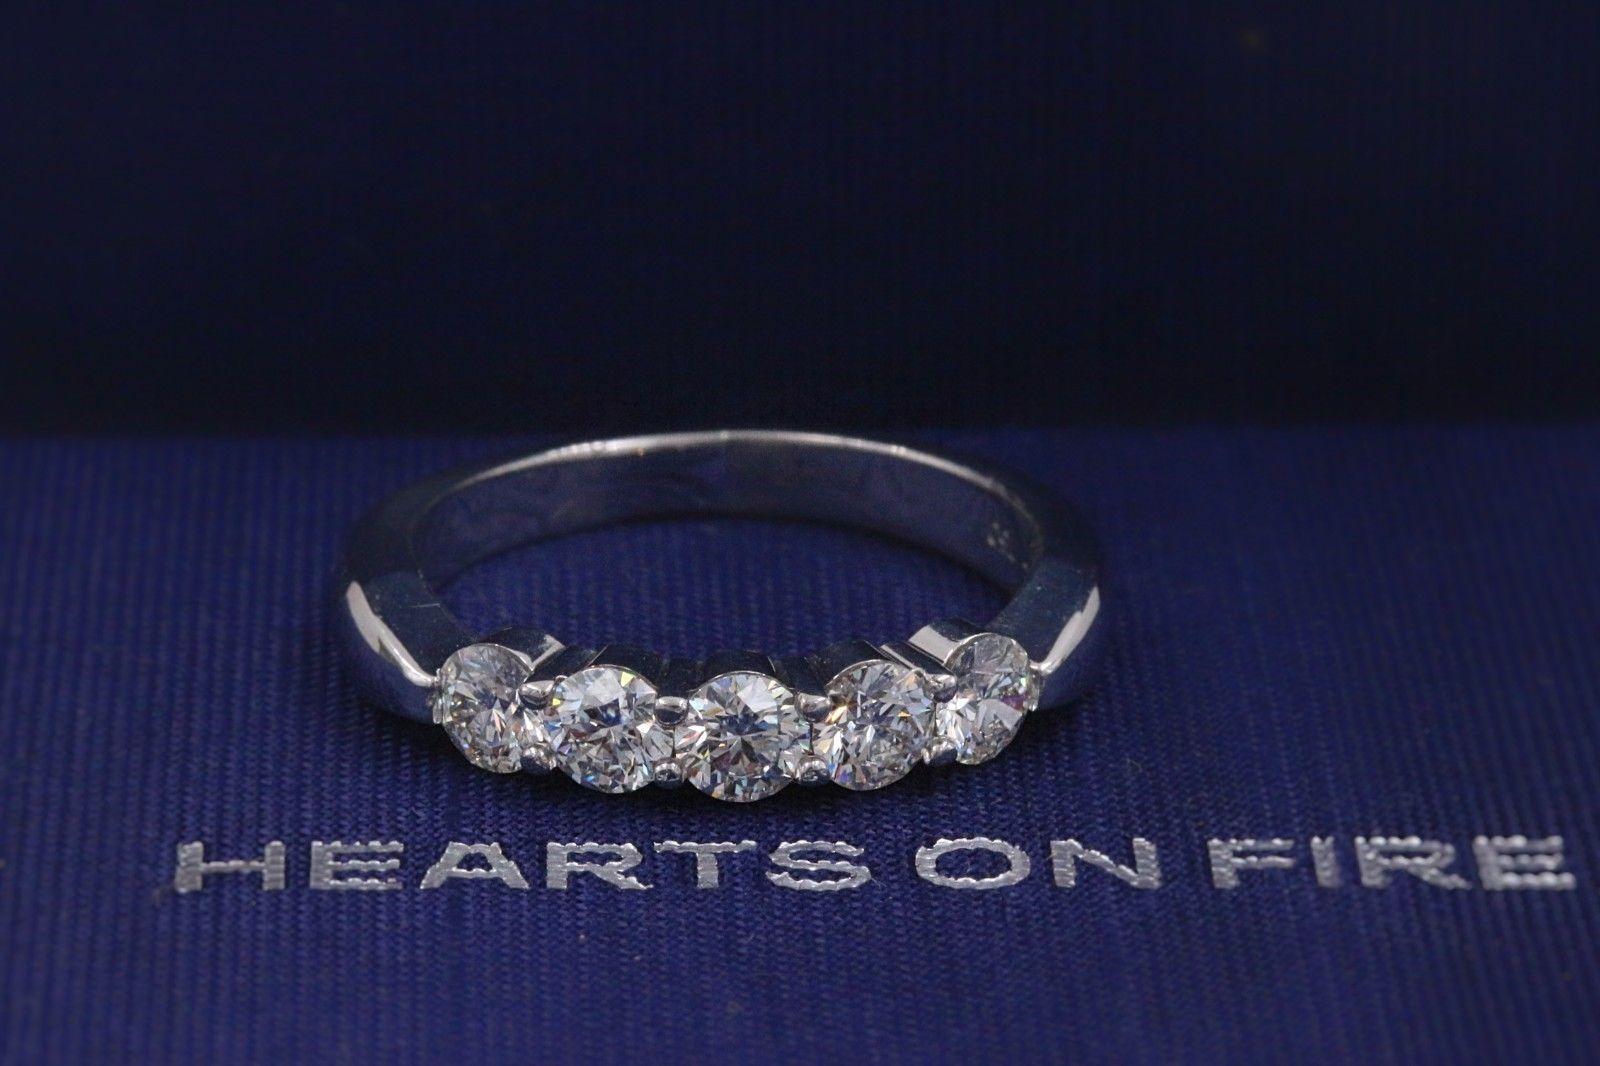 Hearts on Fire Multiplicity Love Diamond Wedding Band Ring 18k White Gold 1.20ct 1